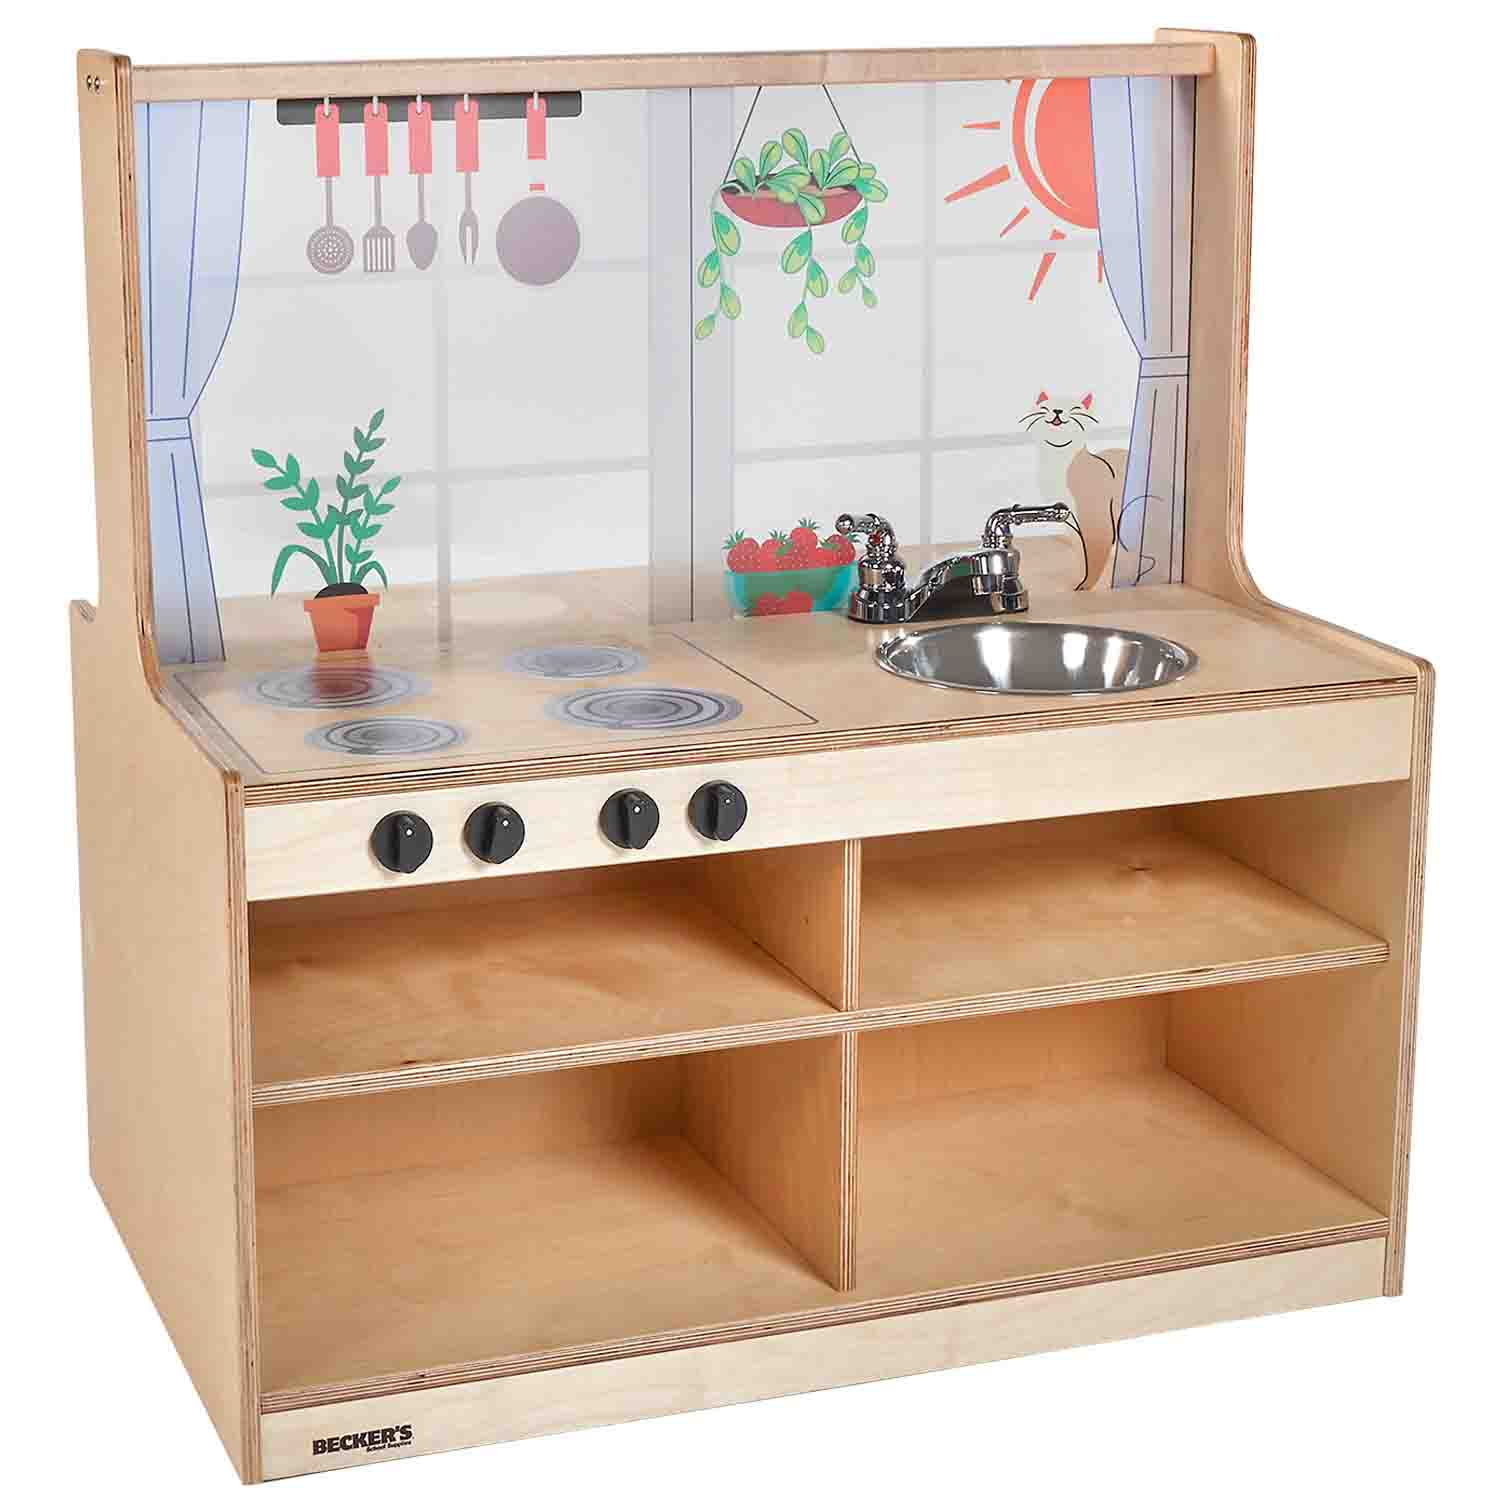 Becker's Sunny Day Double-Sided Toddler Kitchen